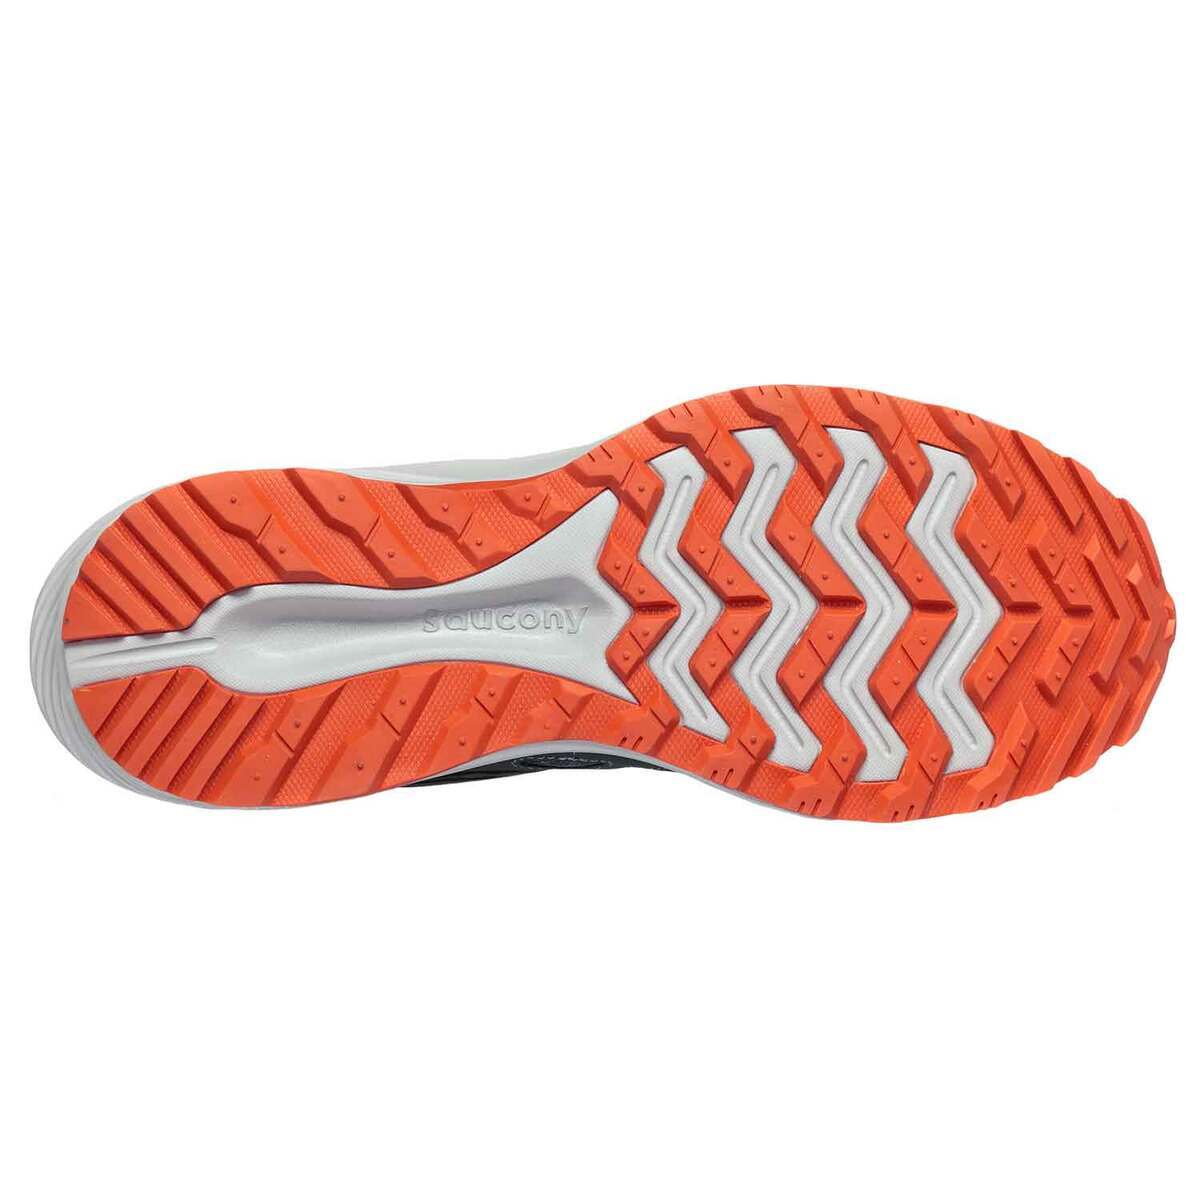 Saucony Women's Cohesion TR 16 Low Trail Running Shoes | Sportsman's ...